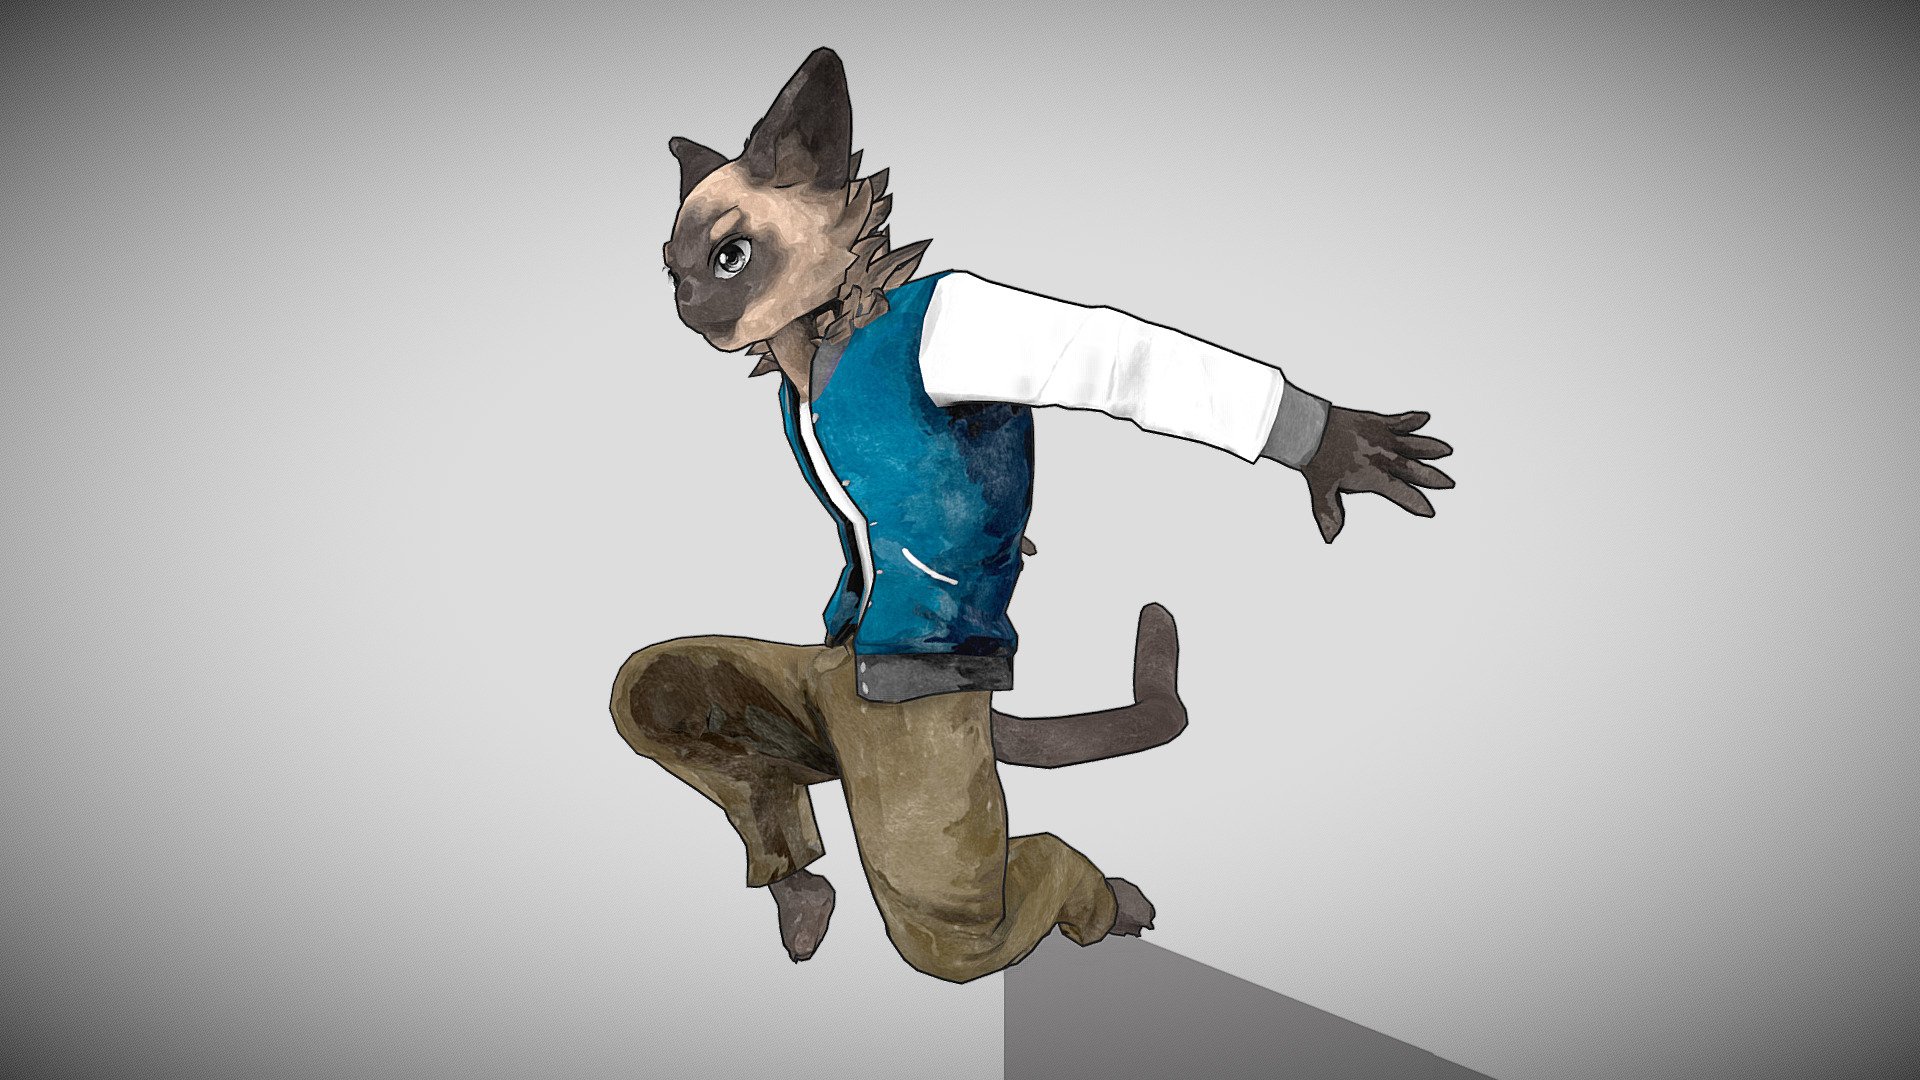 Action Cat 3D model by Wirbus (NathanGammel) [6127115] Sketchfab